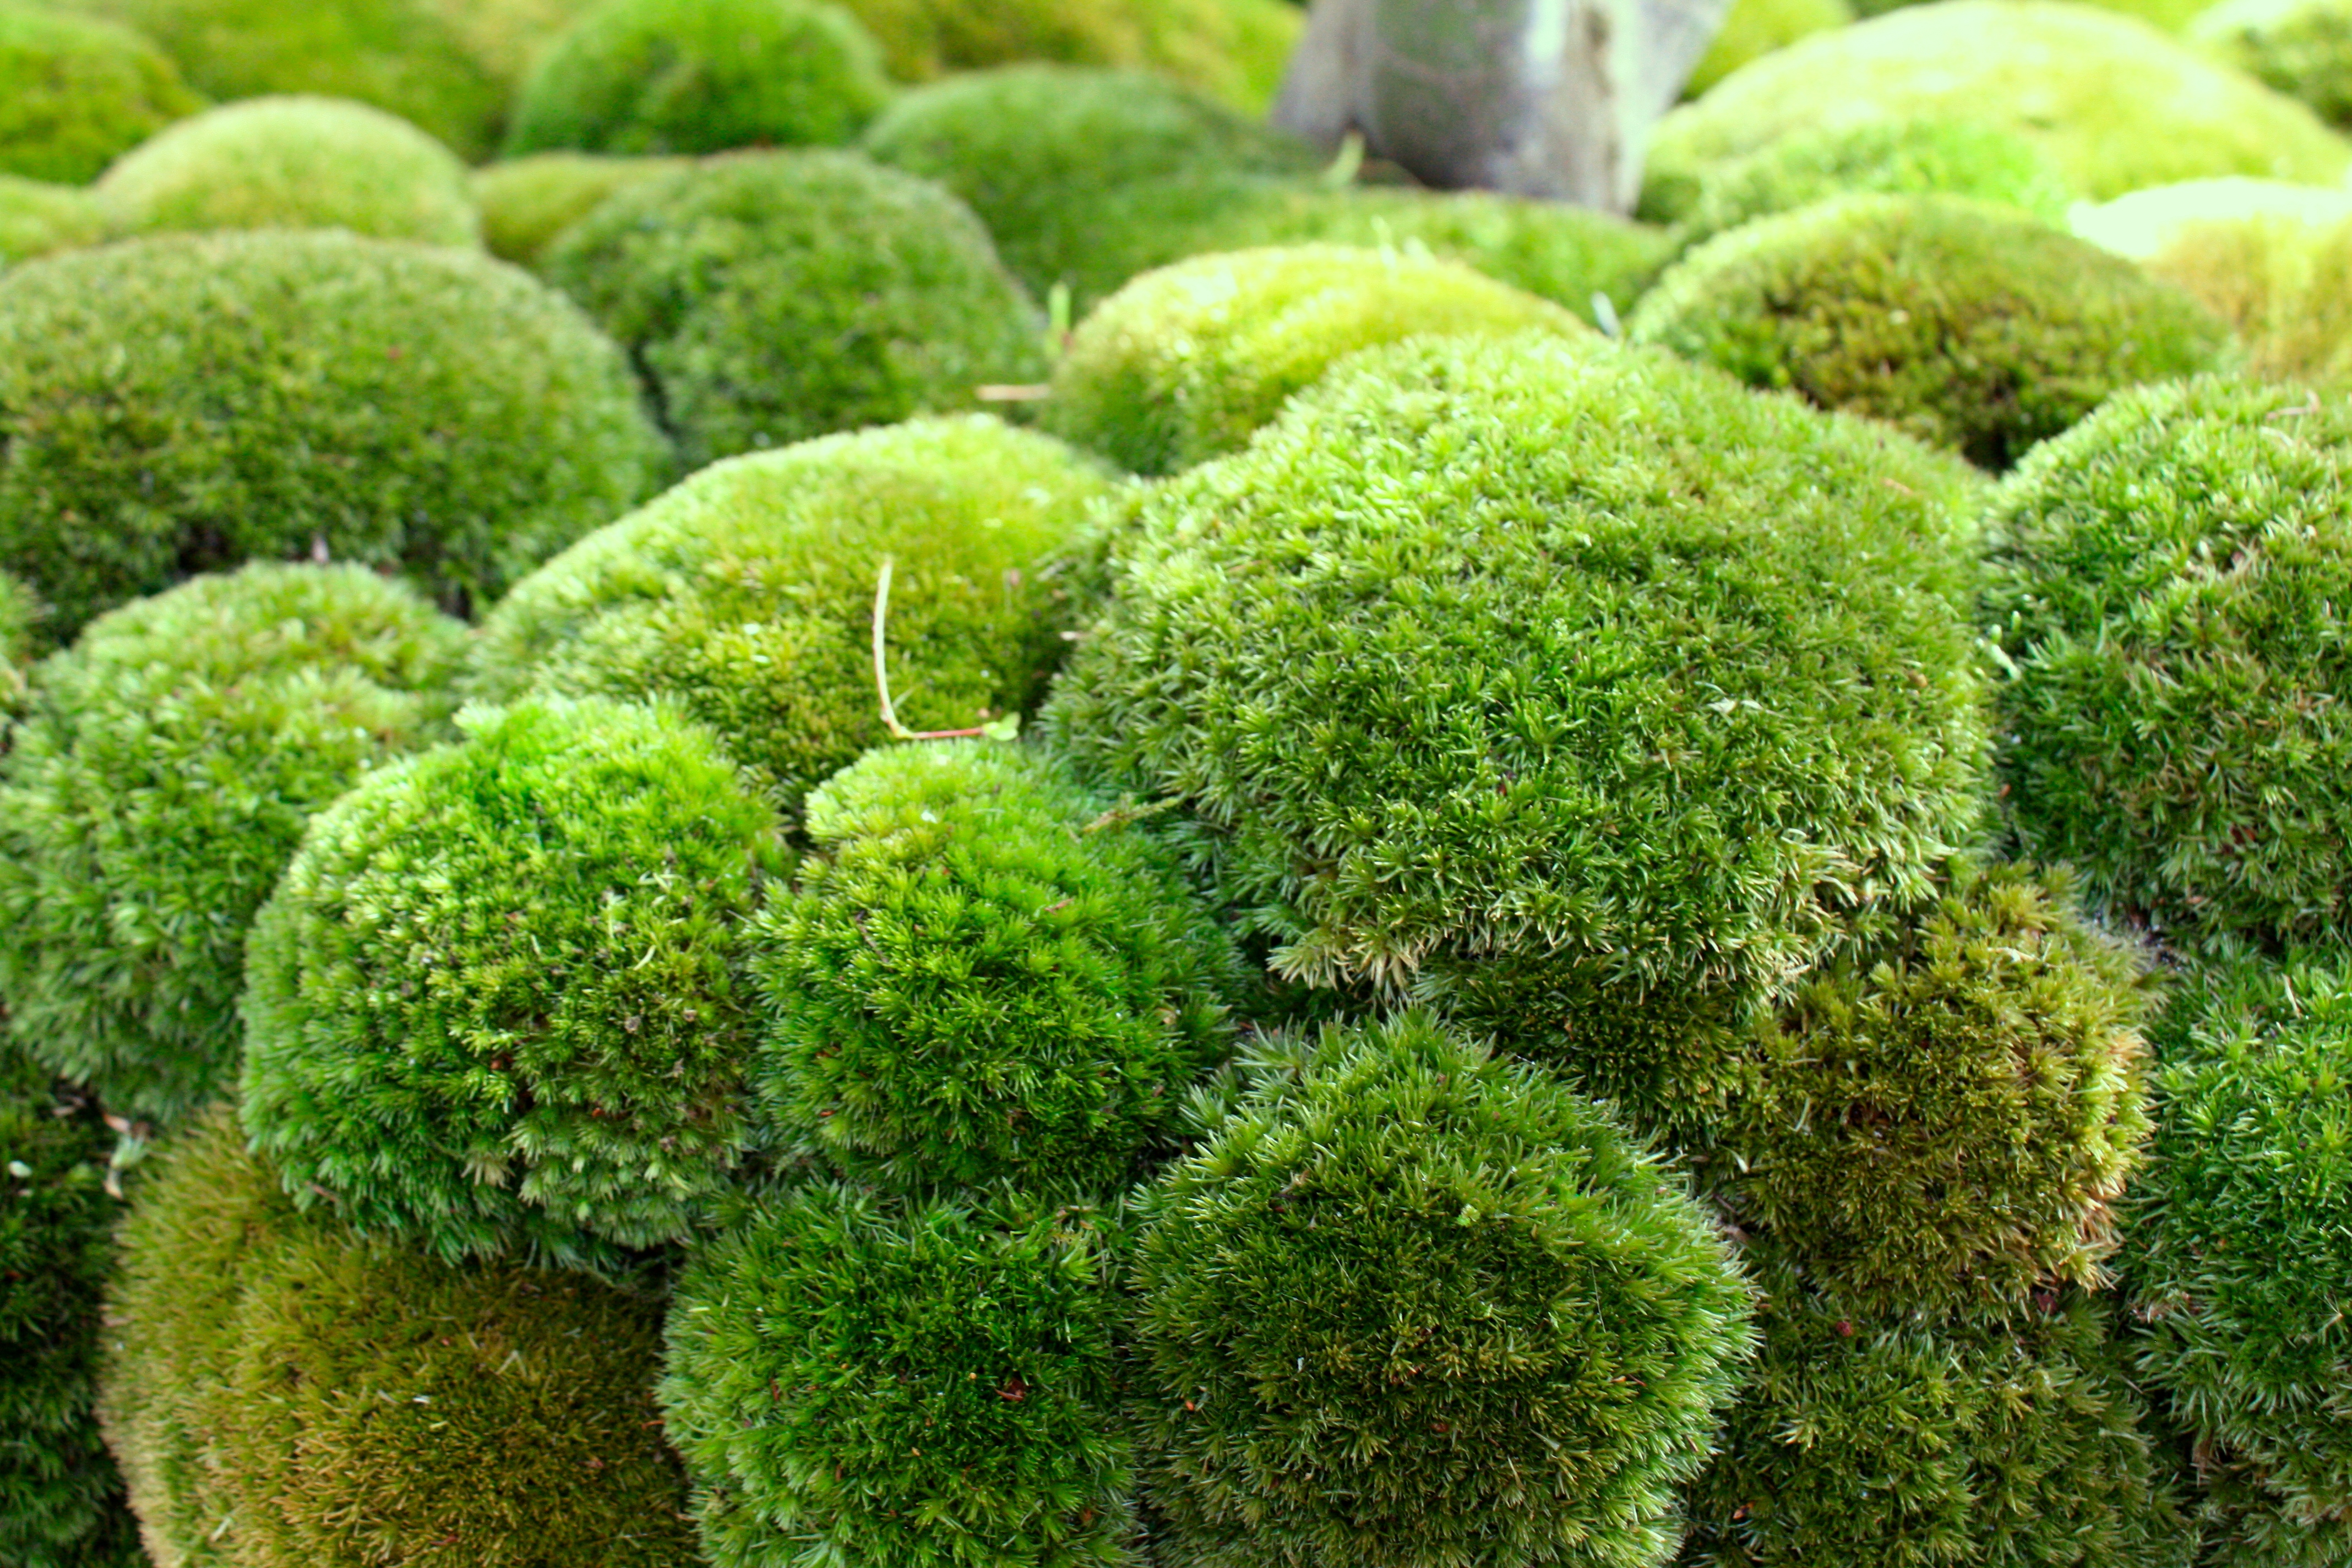 Air freshener moss genetically engineered by failed plant glow-in ...